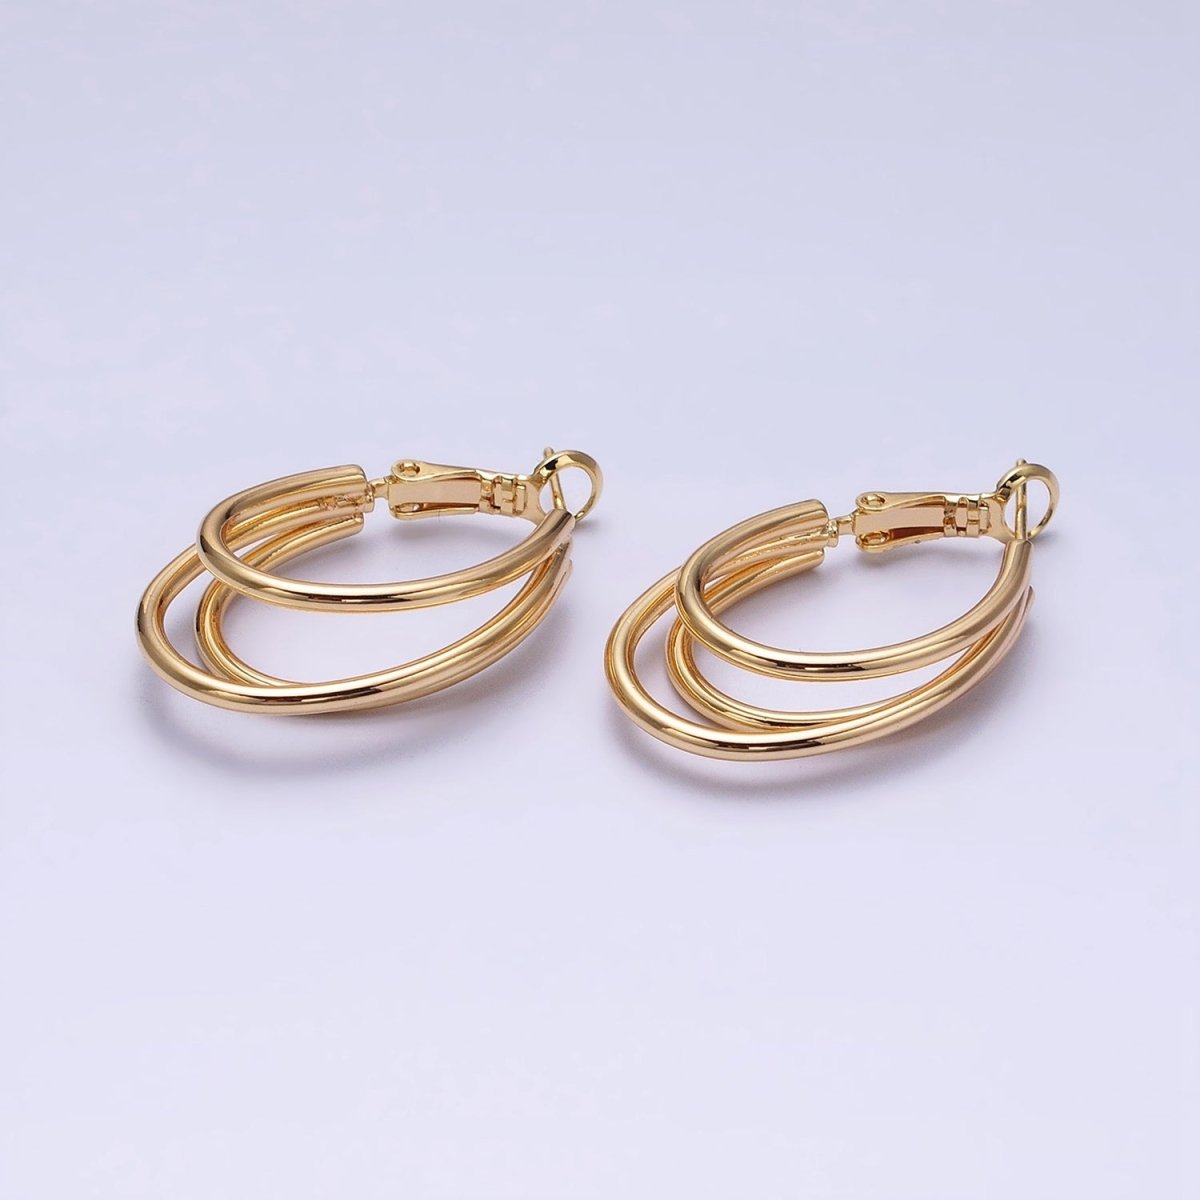 16K Gold Filled Triple Band Oblong Hinge Hoop Earrings in Gold & Silver | AD847 AD848 - DLUXCA